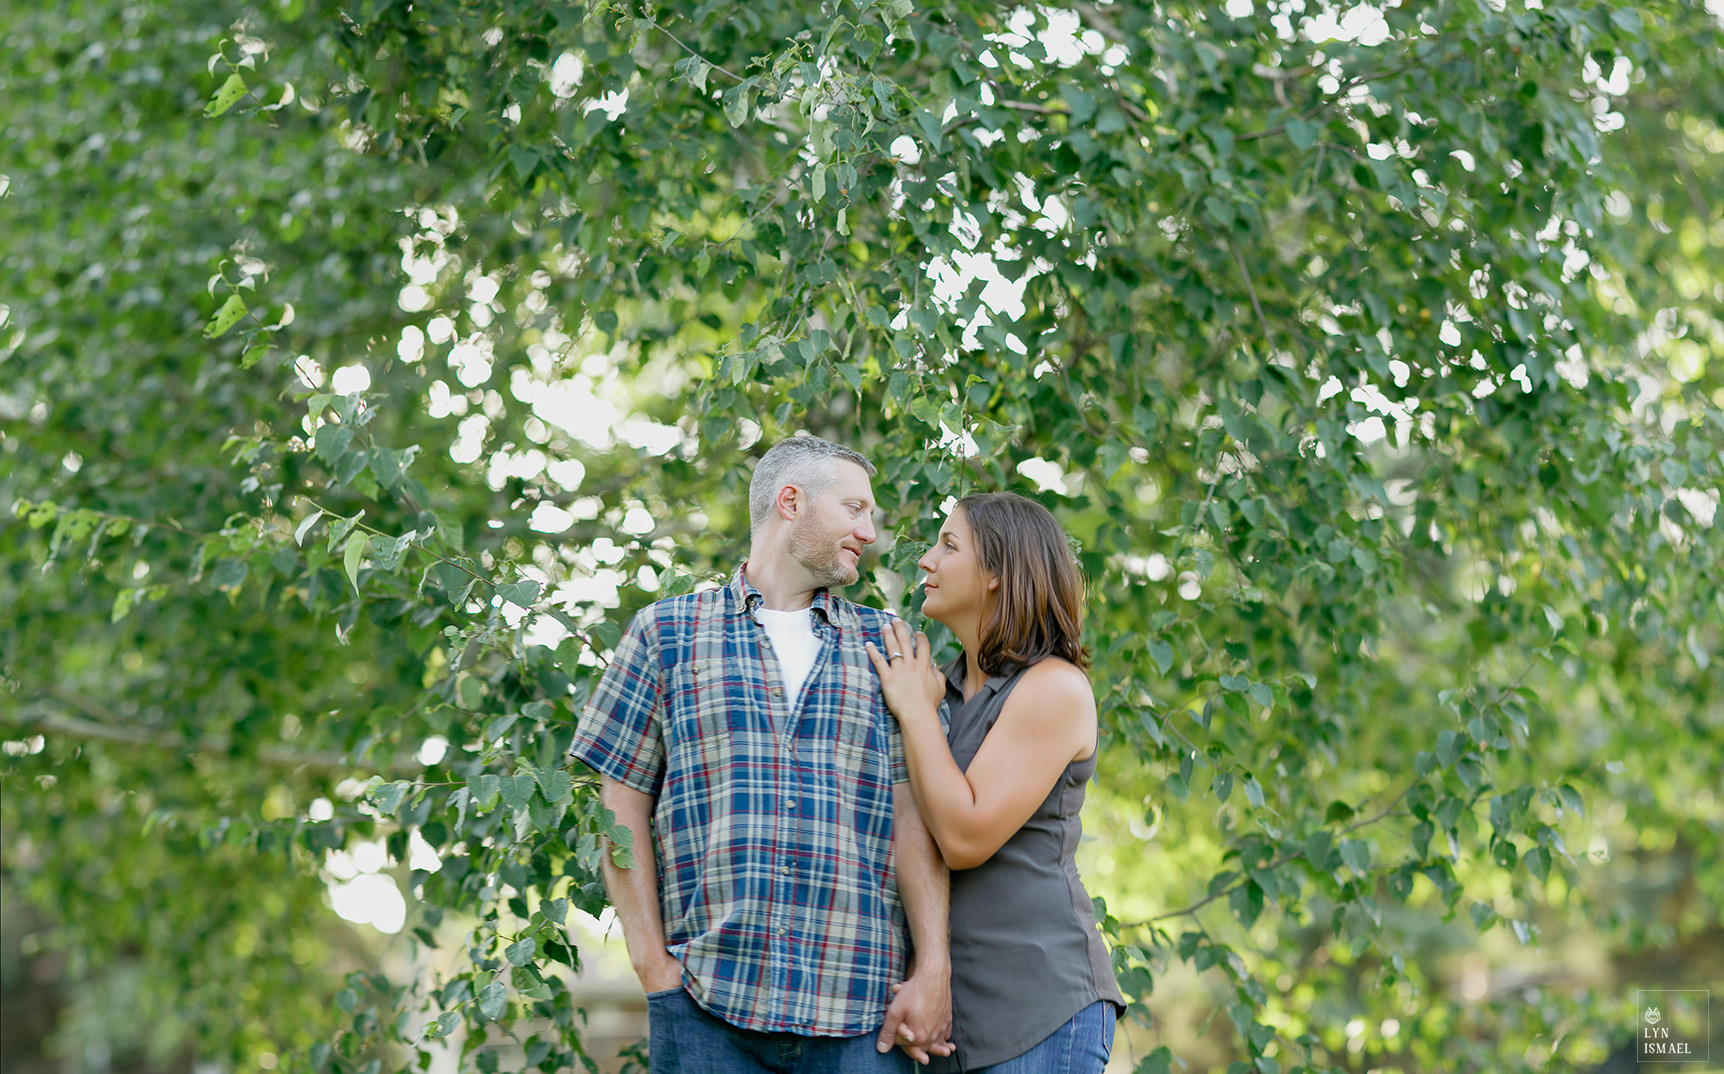 Brenizer method with a newly engaged couple from Innisfil